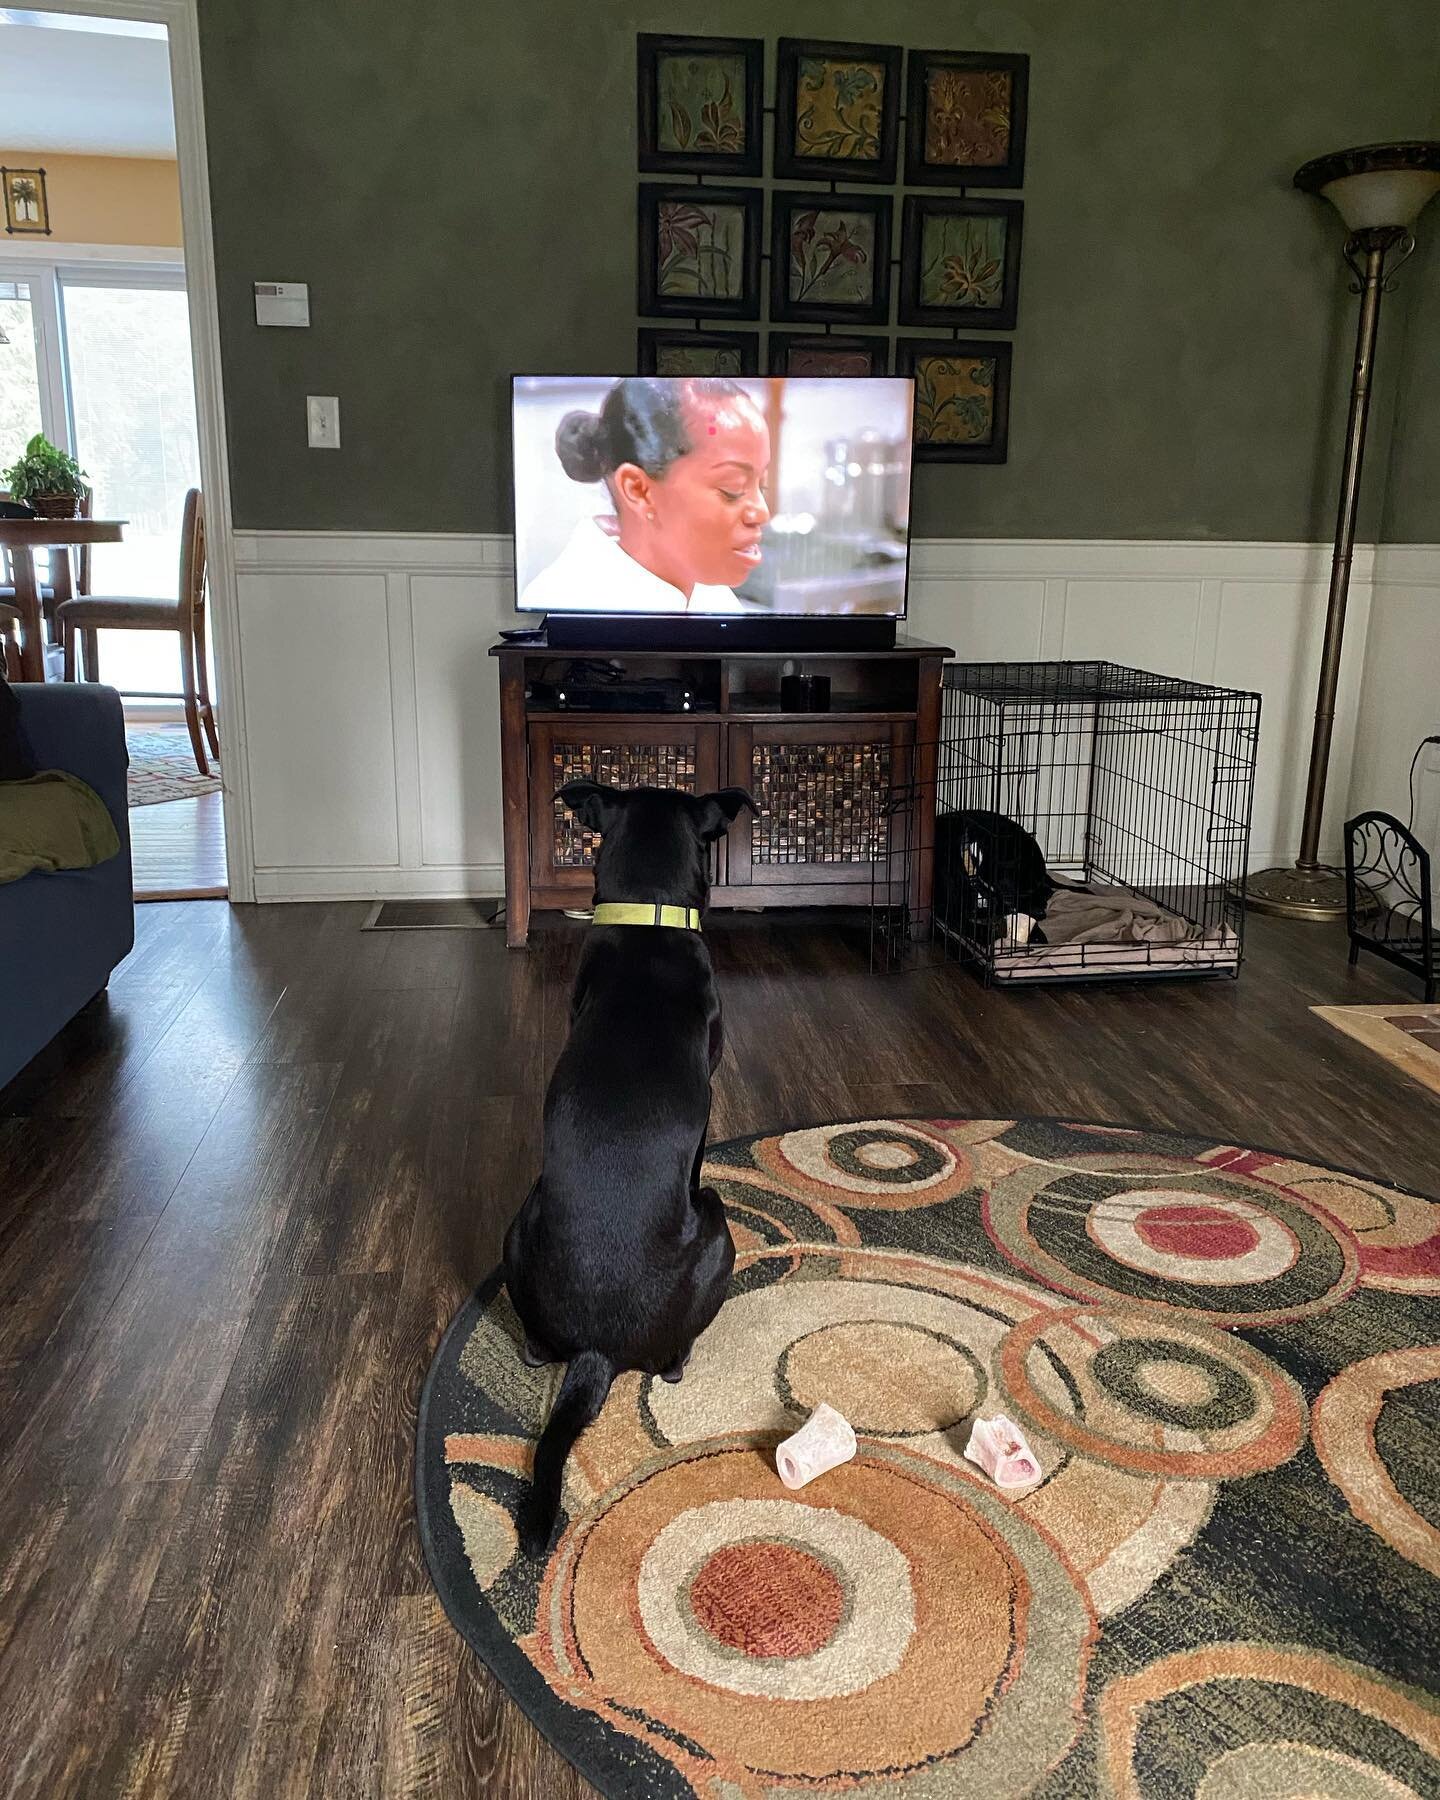 I received an update on my Linus! He likes the food network channel 😆 I think all those bones his mama gets him from the butcher shop have an influence 🦴 Linus is quite the gentleman these days! Found as a puppy waiting for his mama who was hit by 